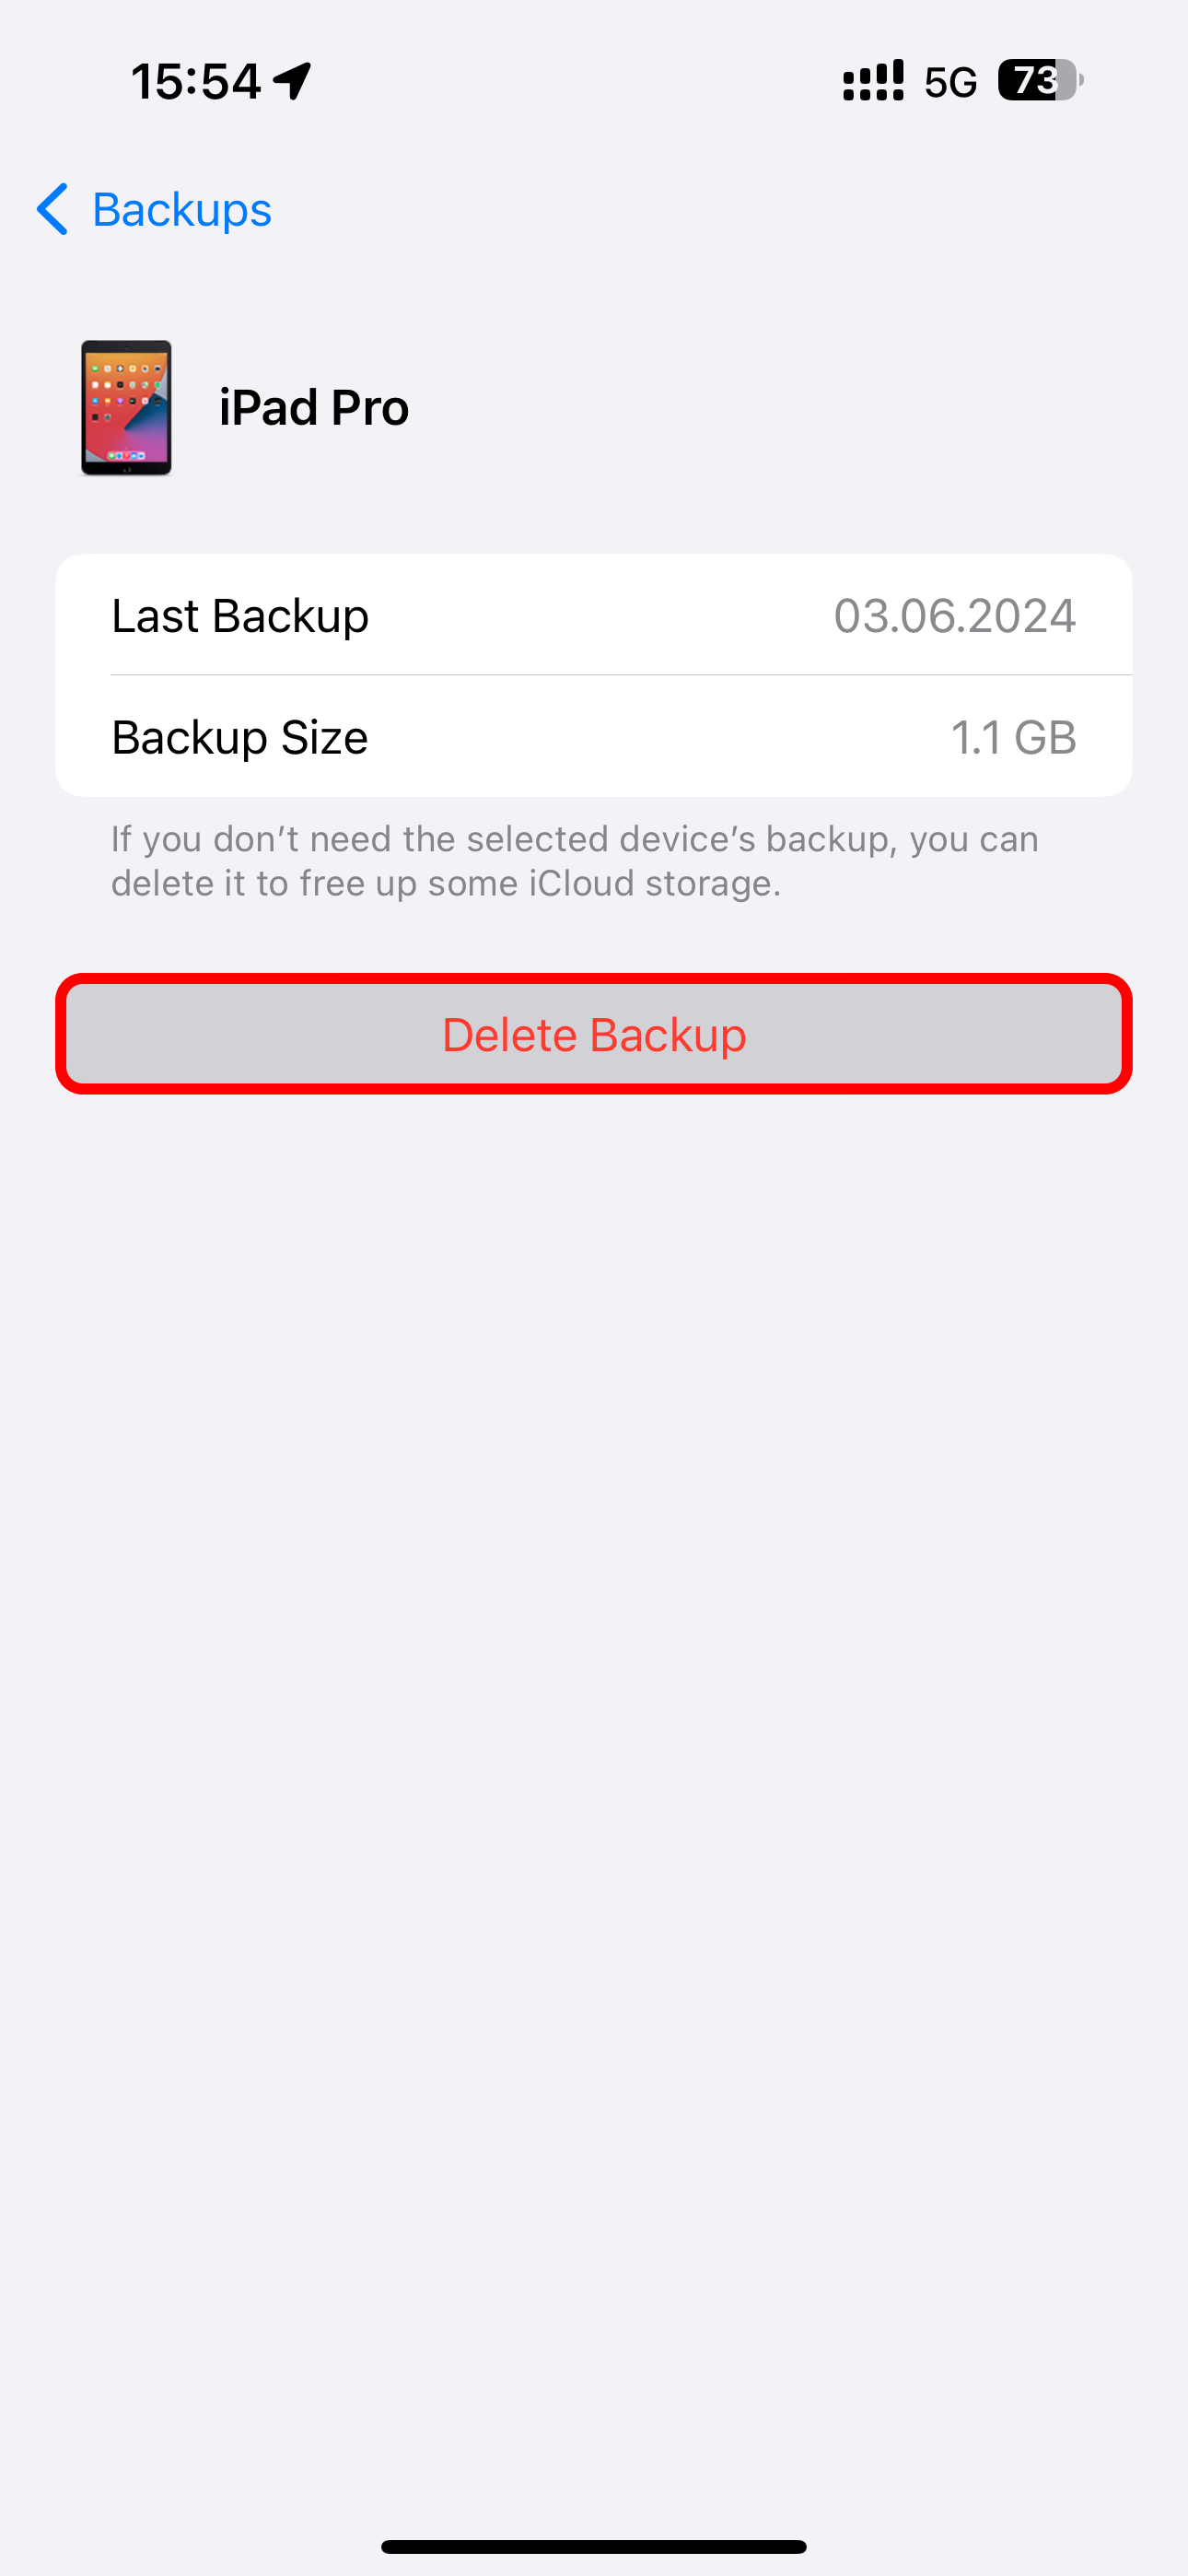 The Delete Backup option selected in Settings on iPhone.